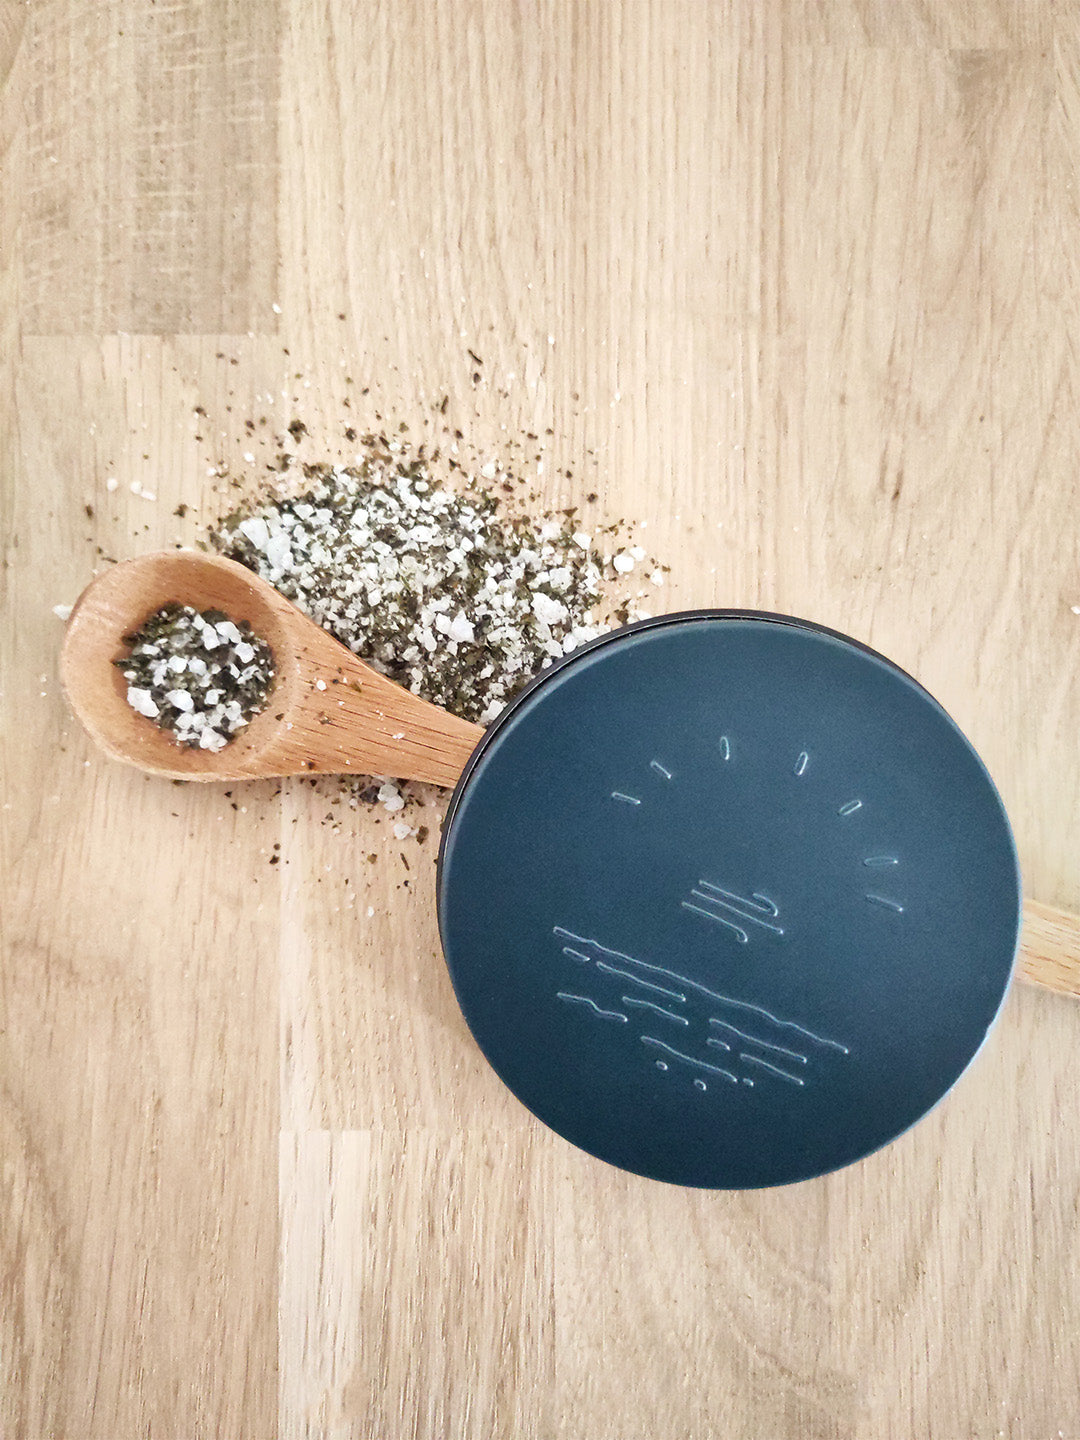 Sea Salt Crystals & Seaweed Flakes - For the kitchen 120g